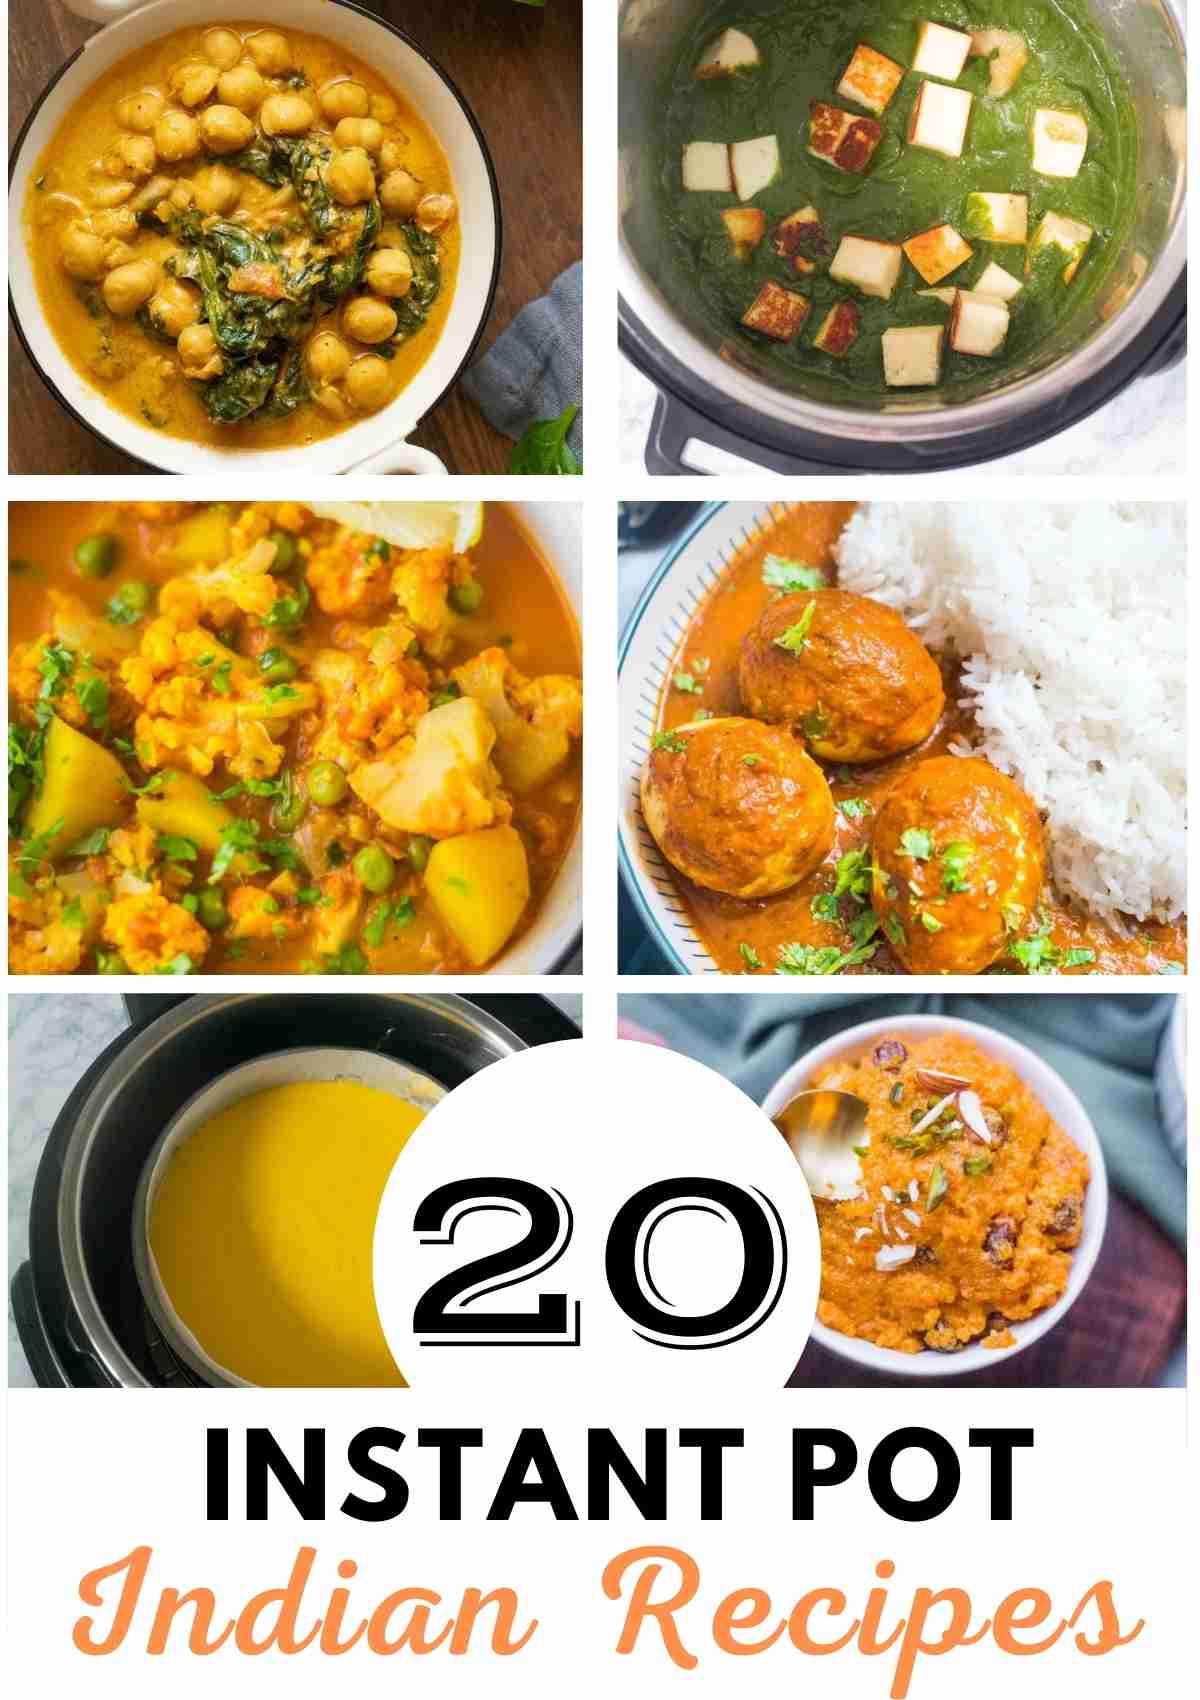 A collage of popular Instant Pot Indian Recipes